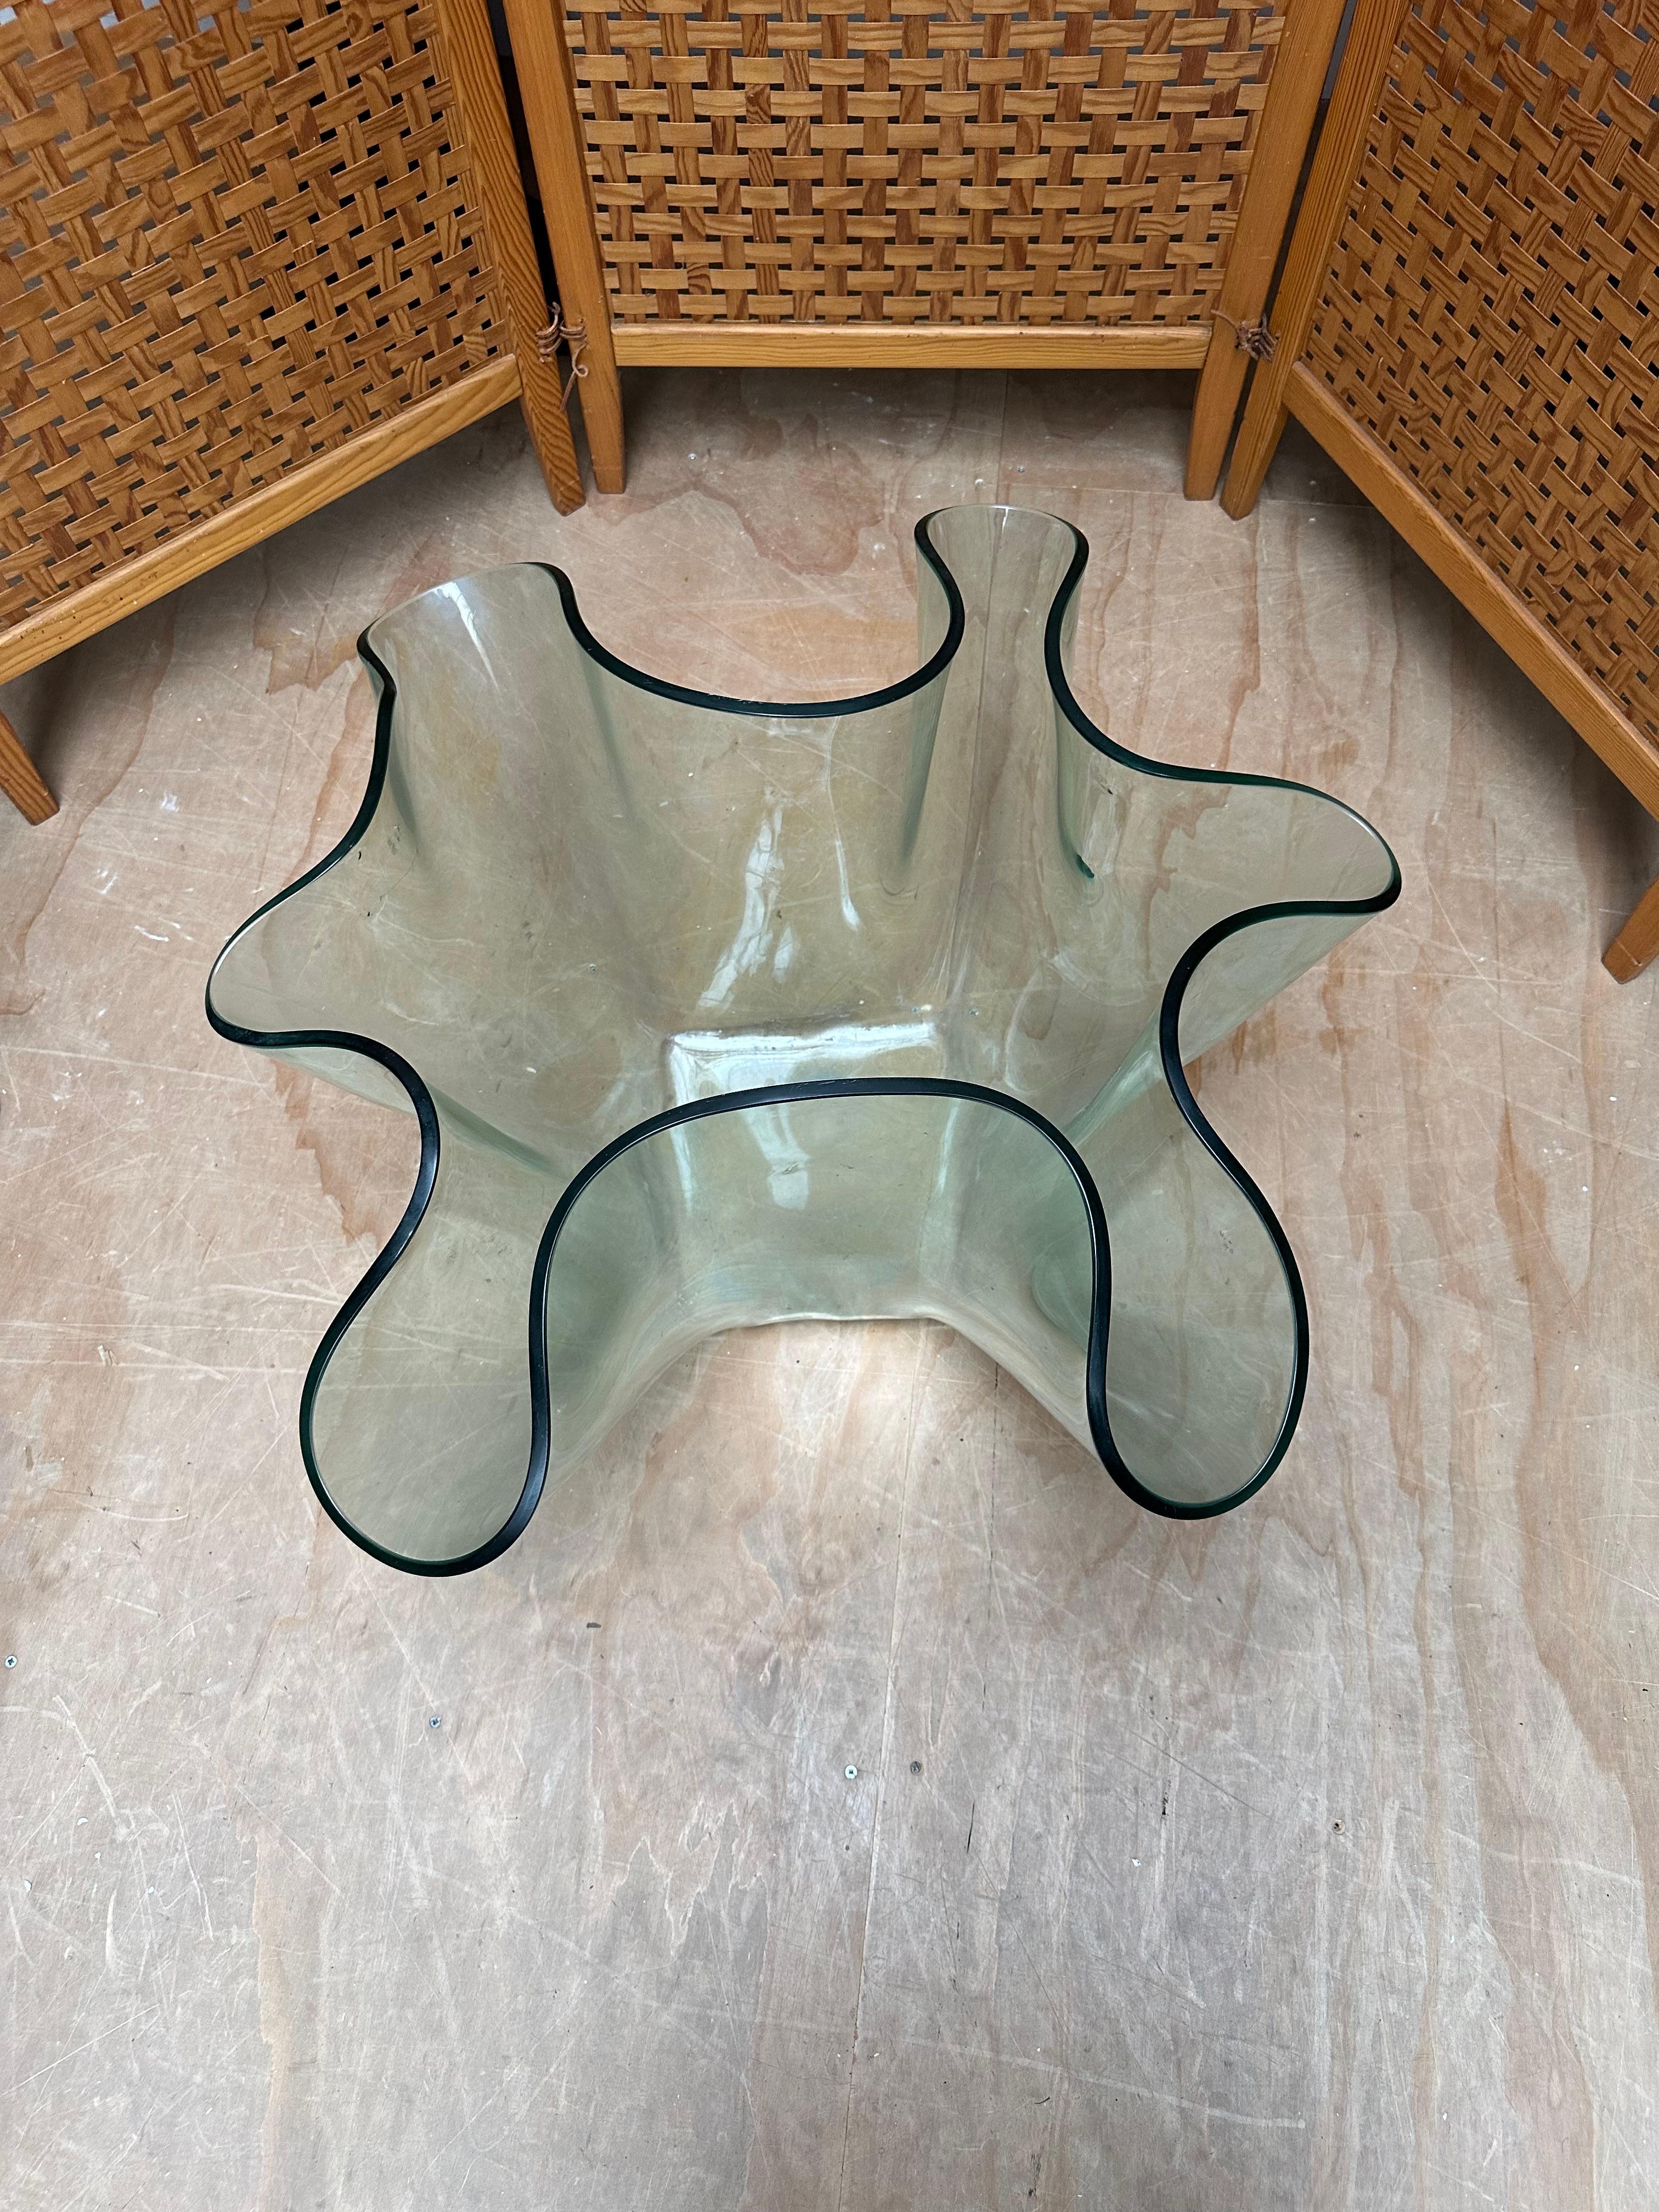 Art Glass Exceptional Strong & Thick Curved Design Murano, Glass Art Floor Jardiniere Vase For Sale